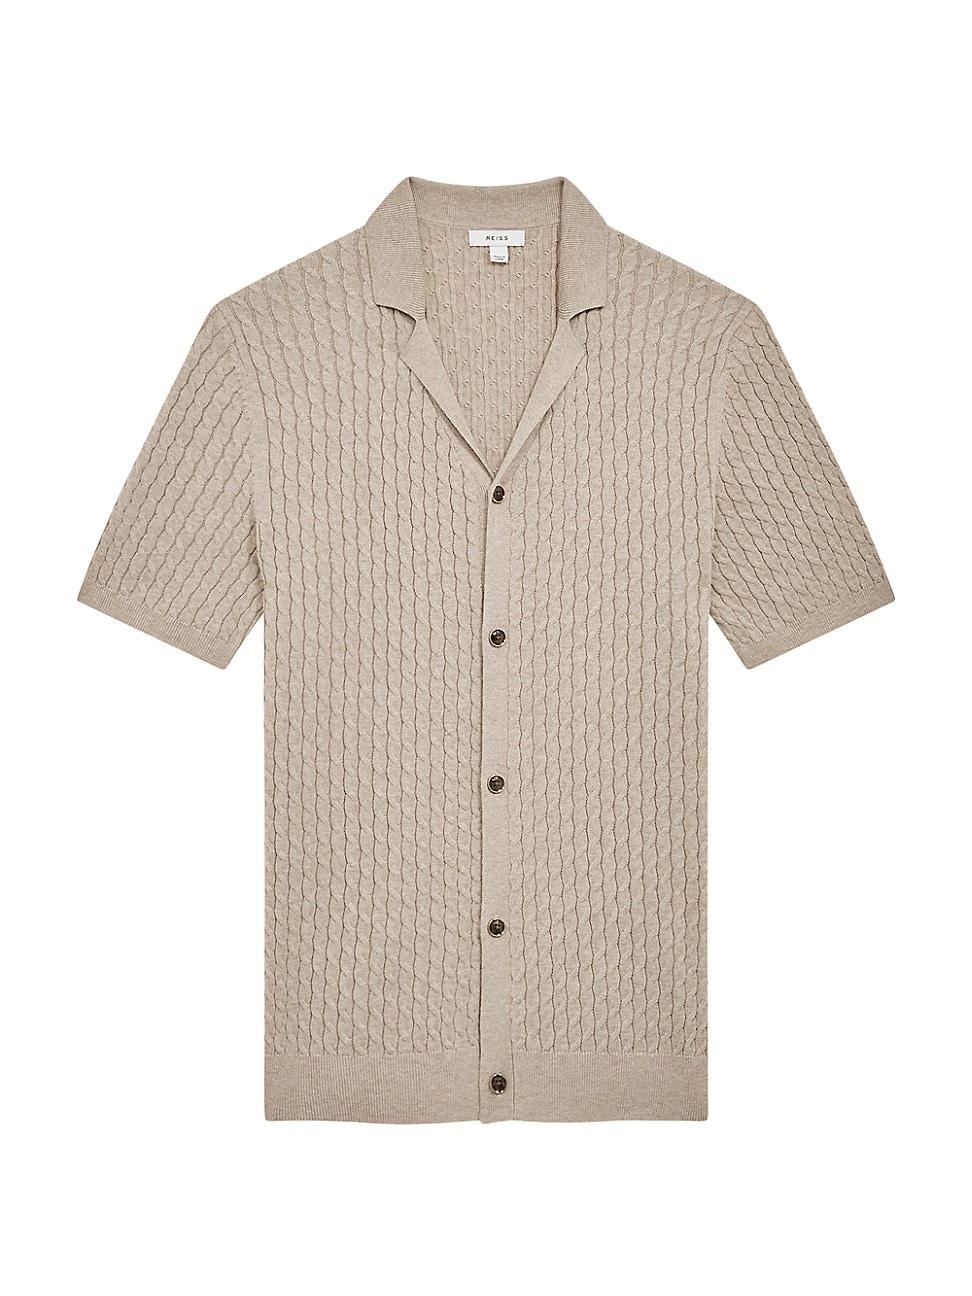 Reiss Grande Cable-knit Shirt in White for Men | Lyst